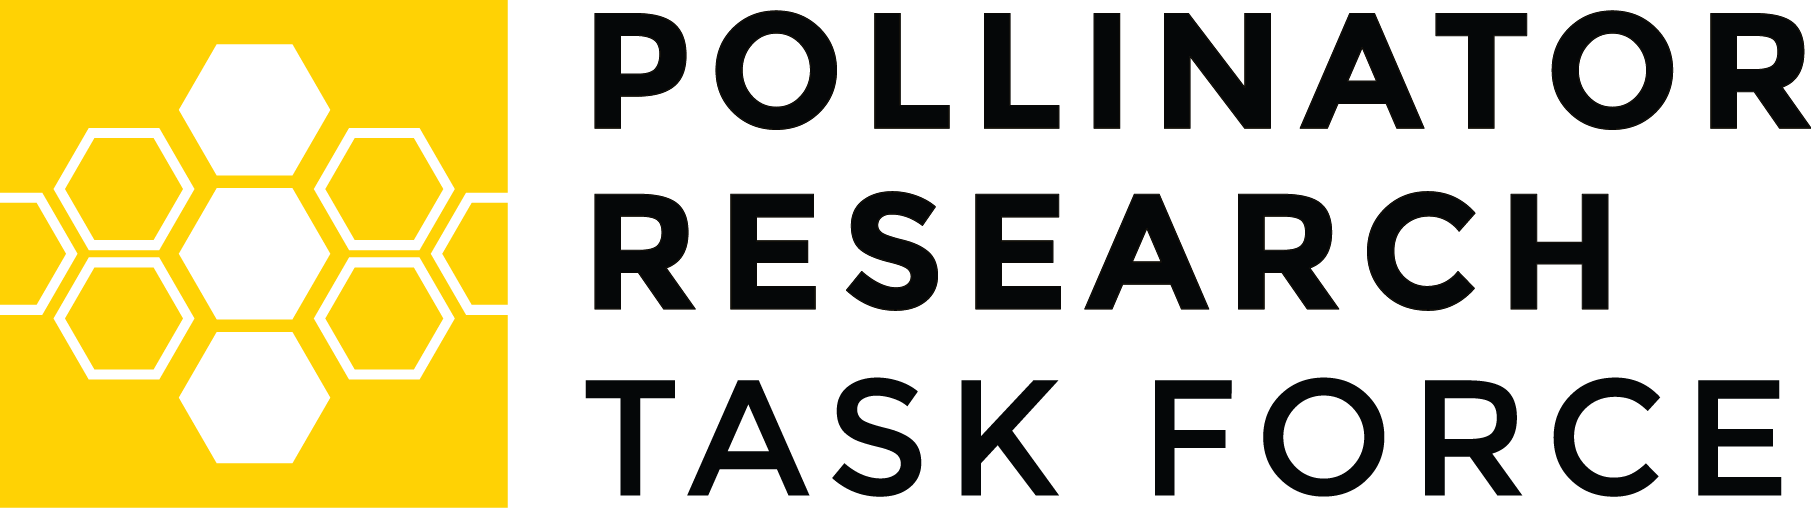 Pollinator Research Task Force